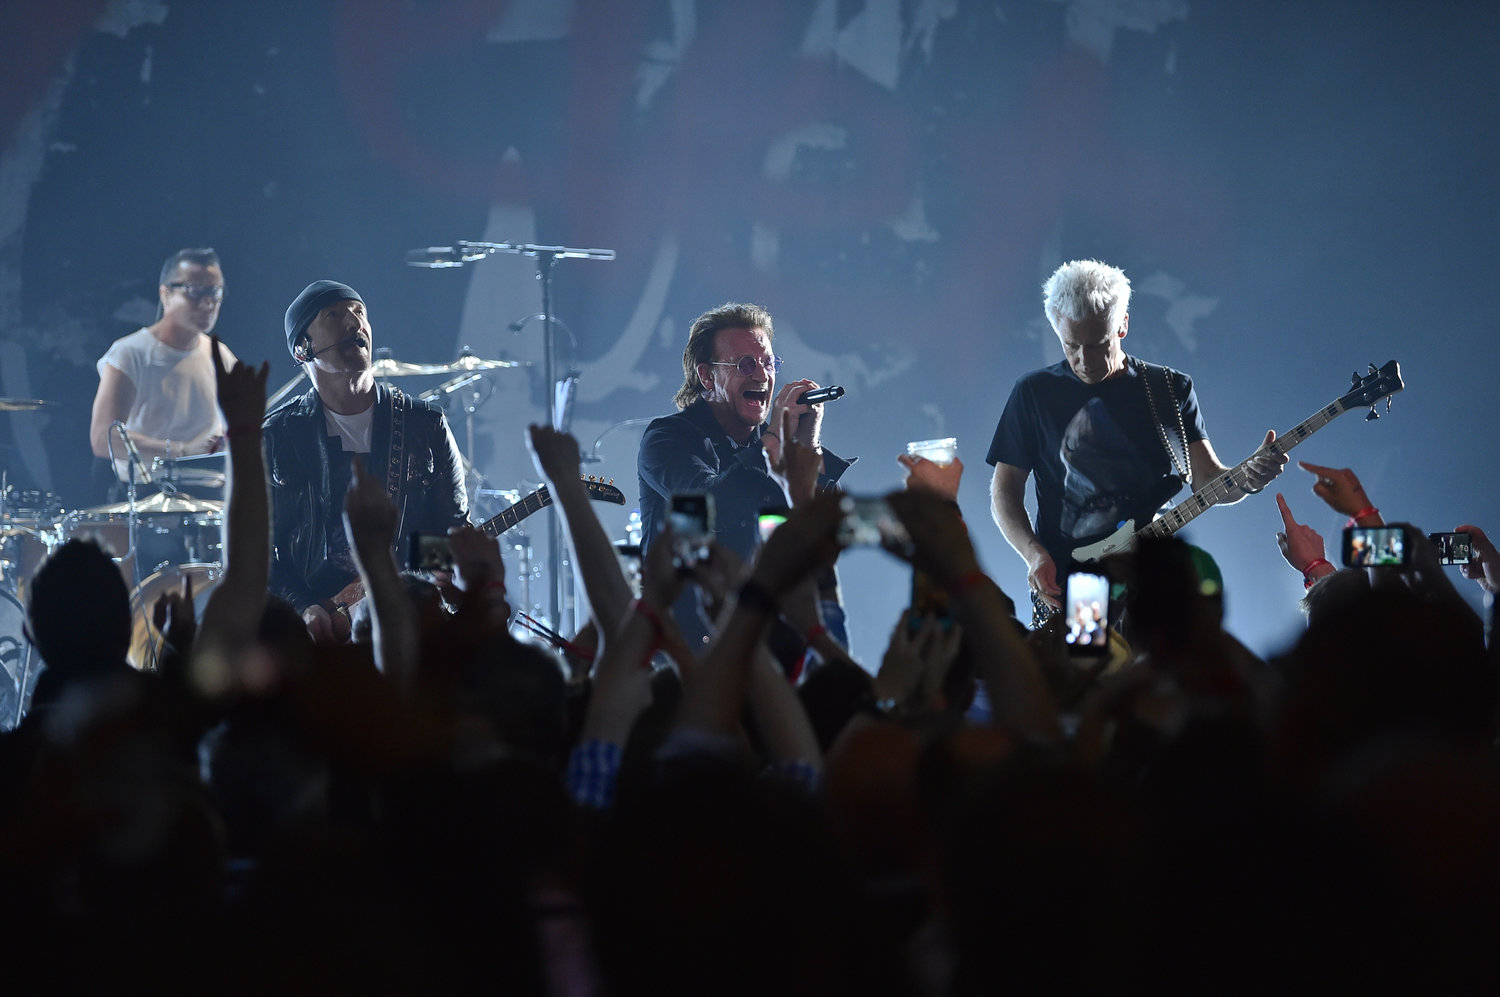 Larry Mullen Jr, left, The Edge, Bono and Adam Clayton of U2 perform during a concert at the Apollo Theater hosted by SiriusXM on June 11, 2018, in New York.